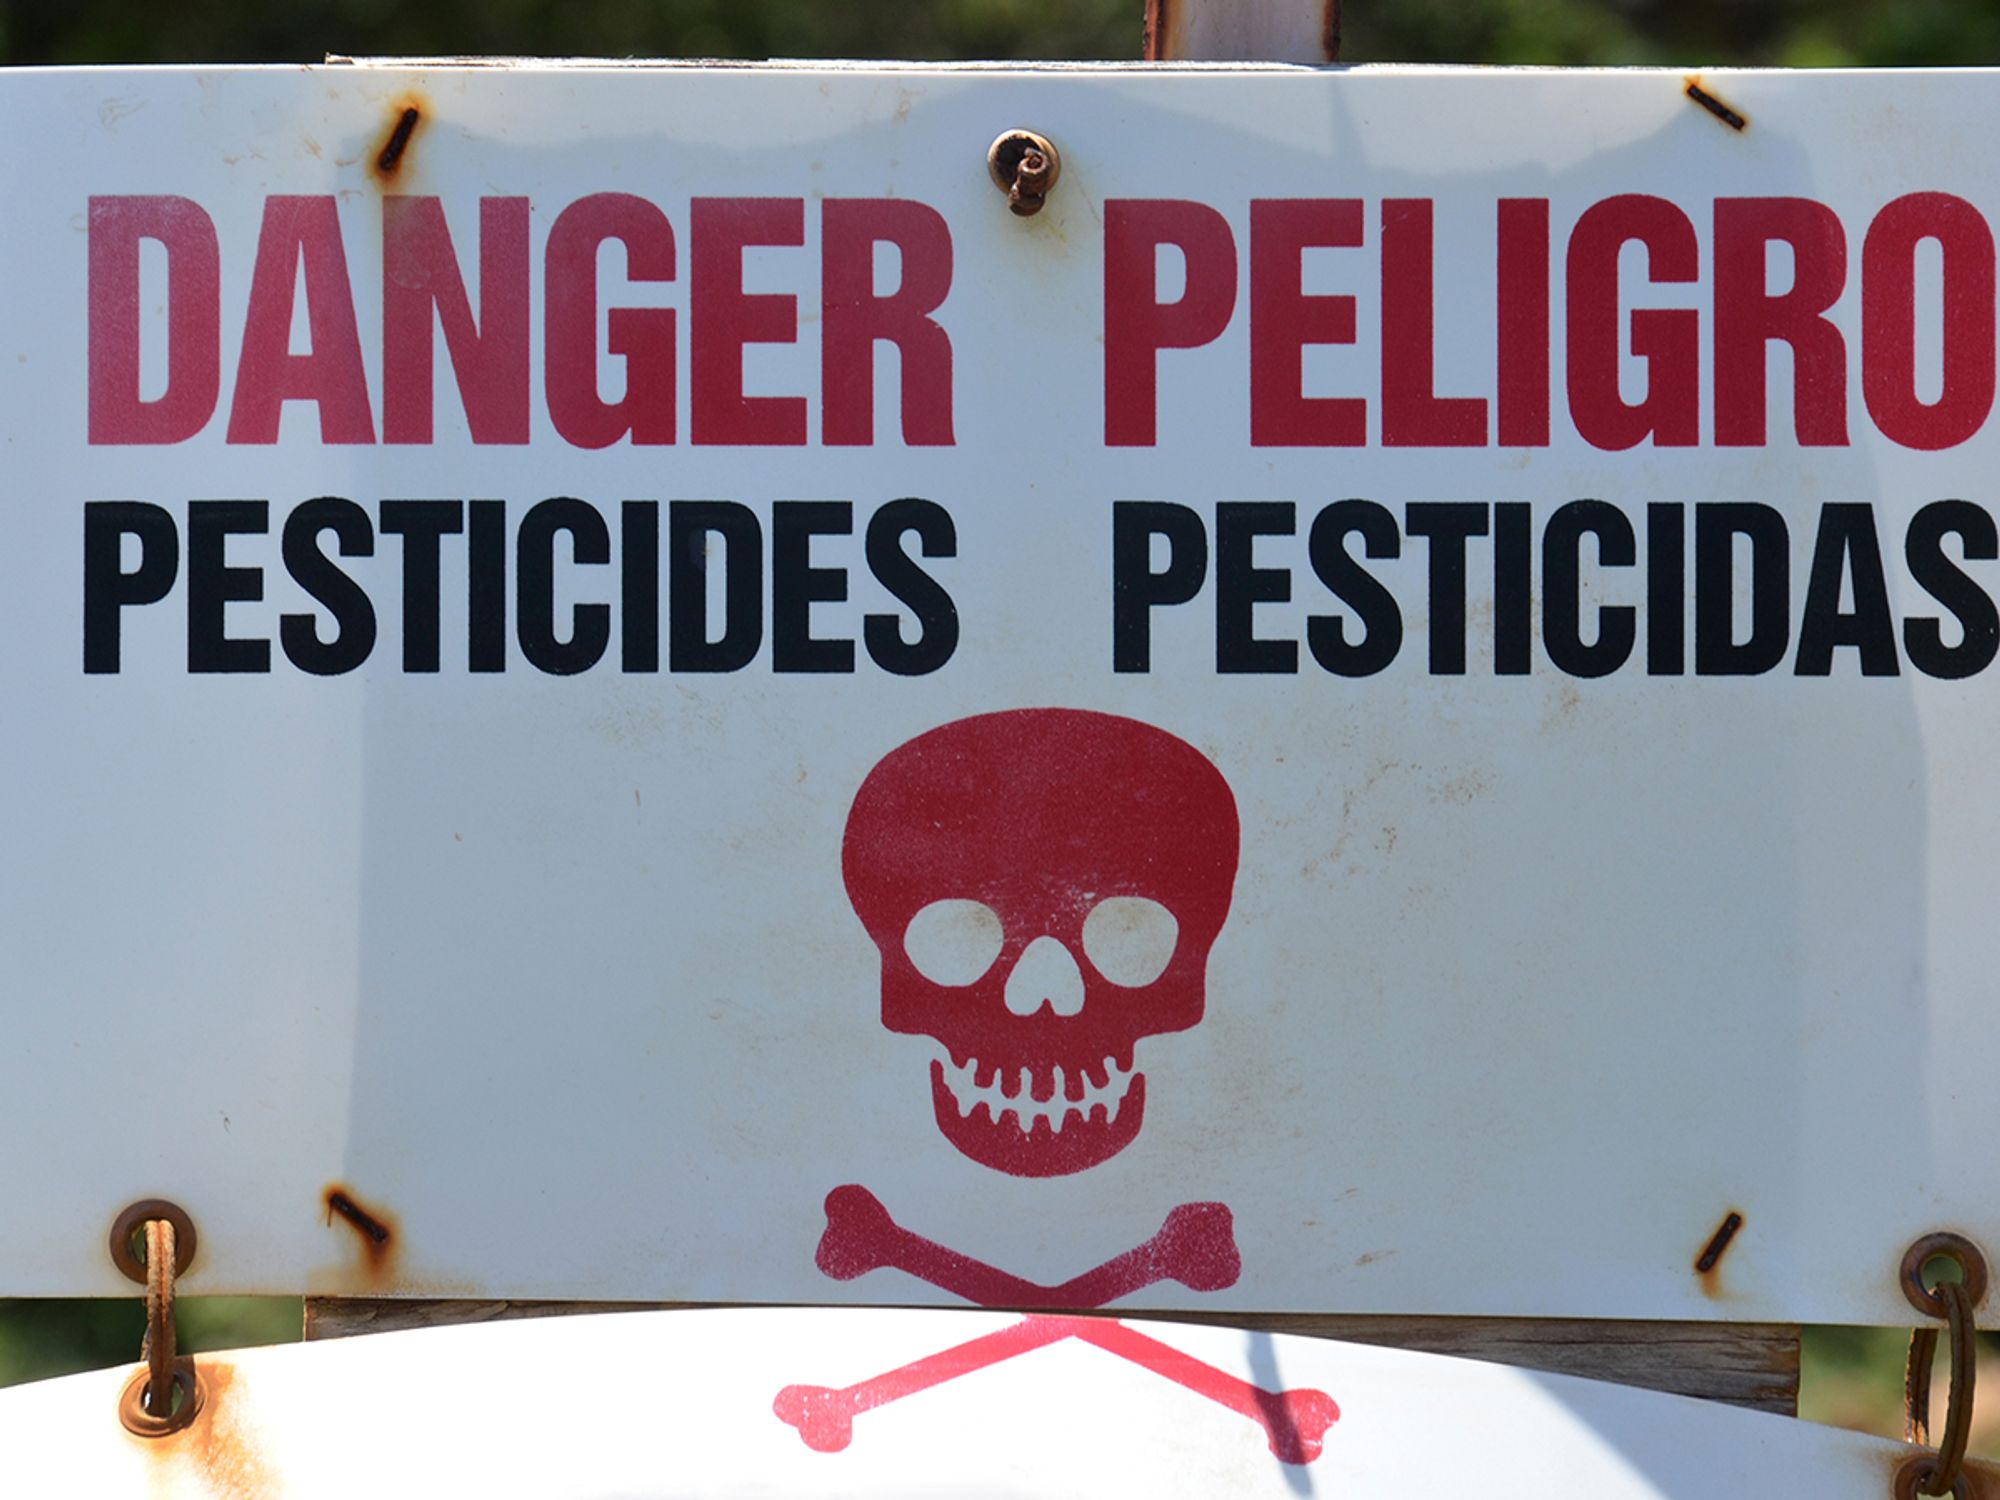 Restricted use pesticides (RUPs)